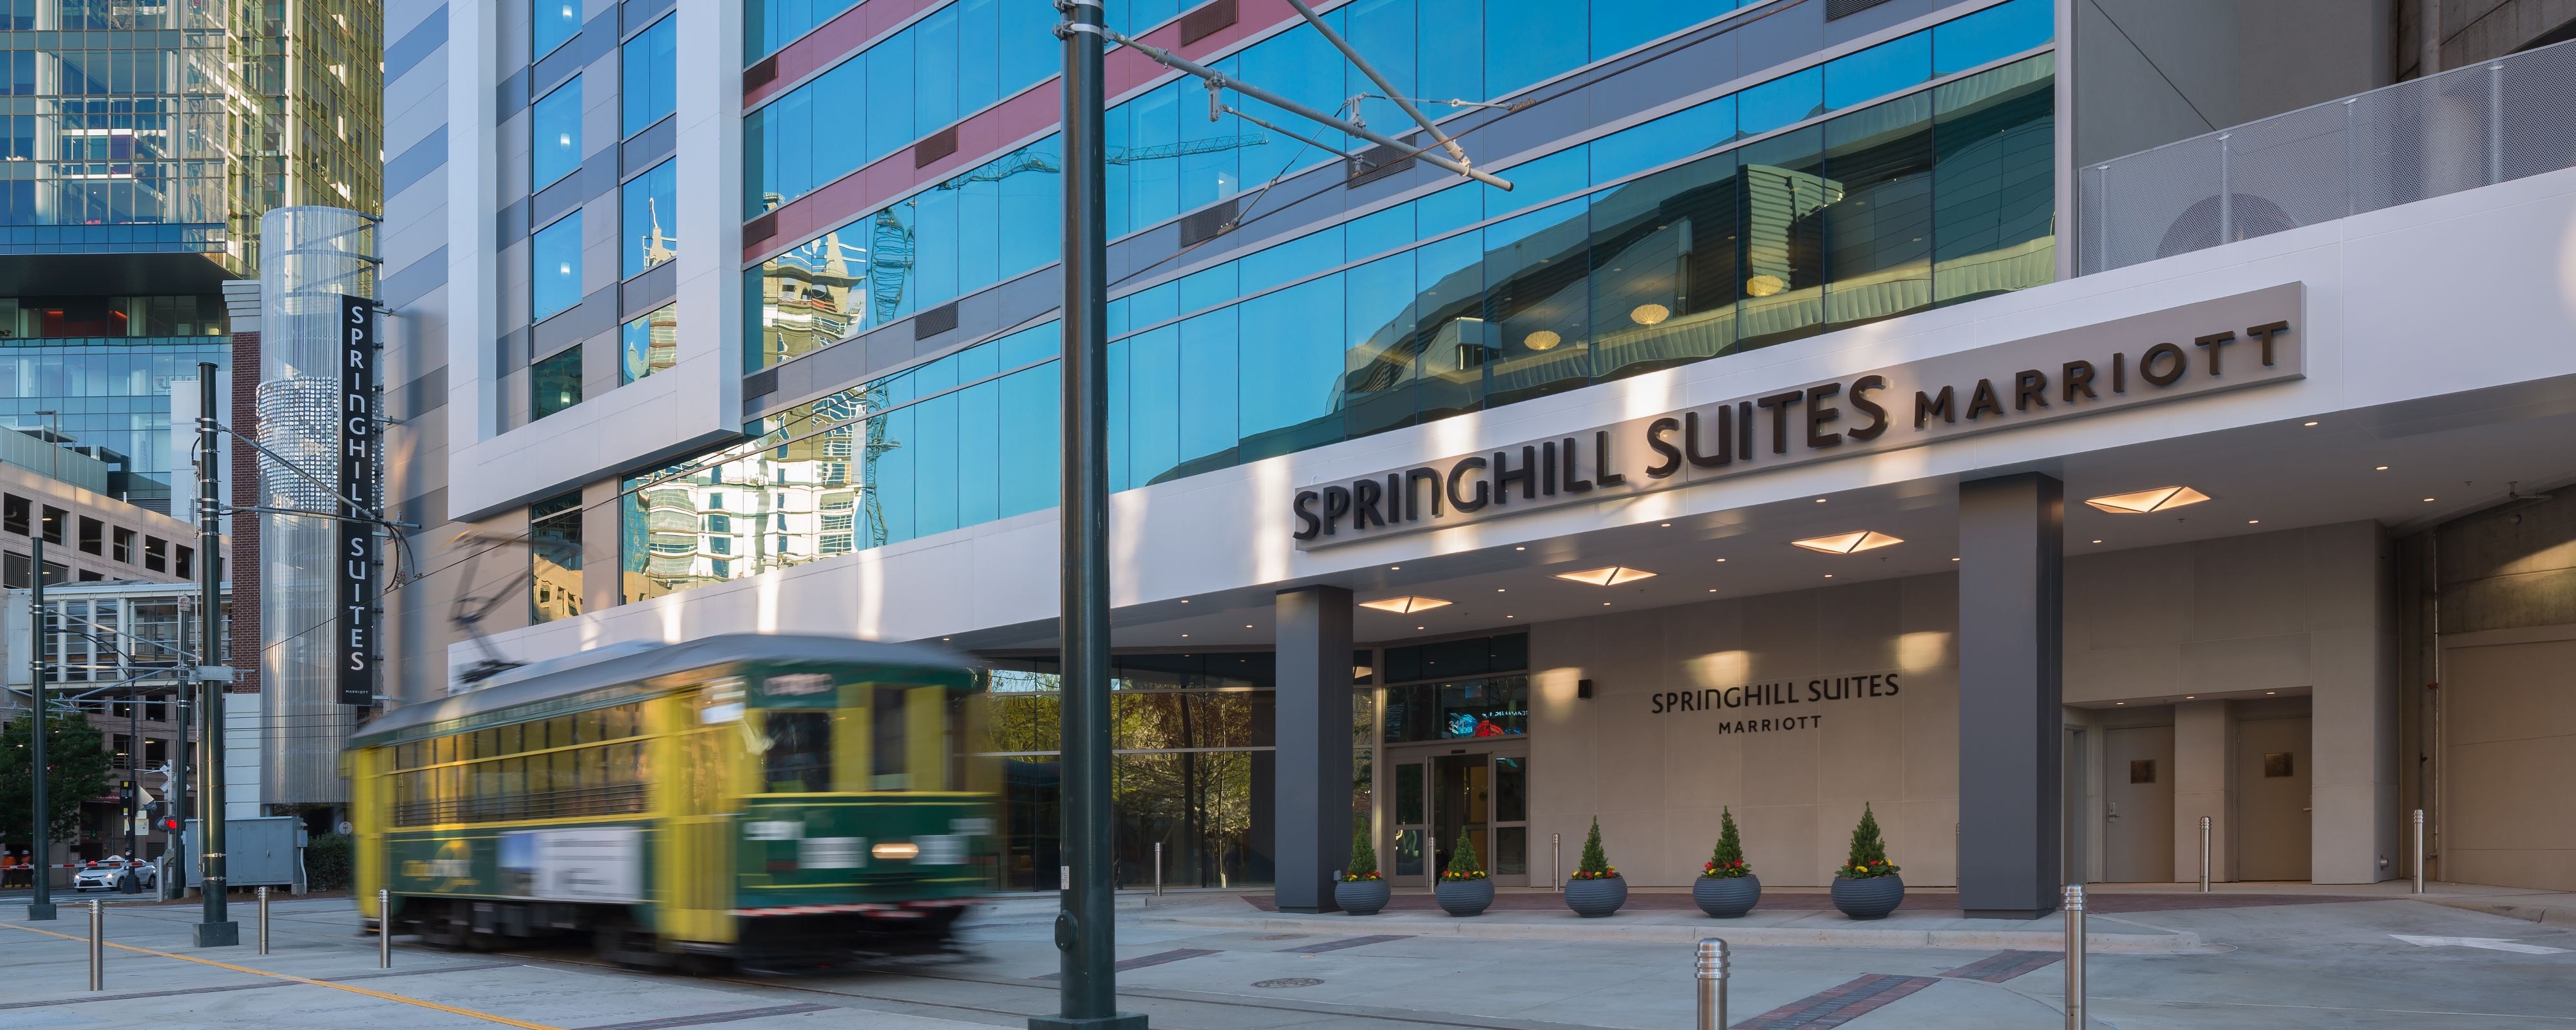 Uptown Charlotte All-Suites Hotel SpringHill Suites